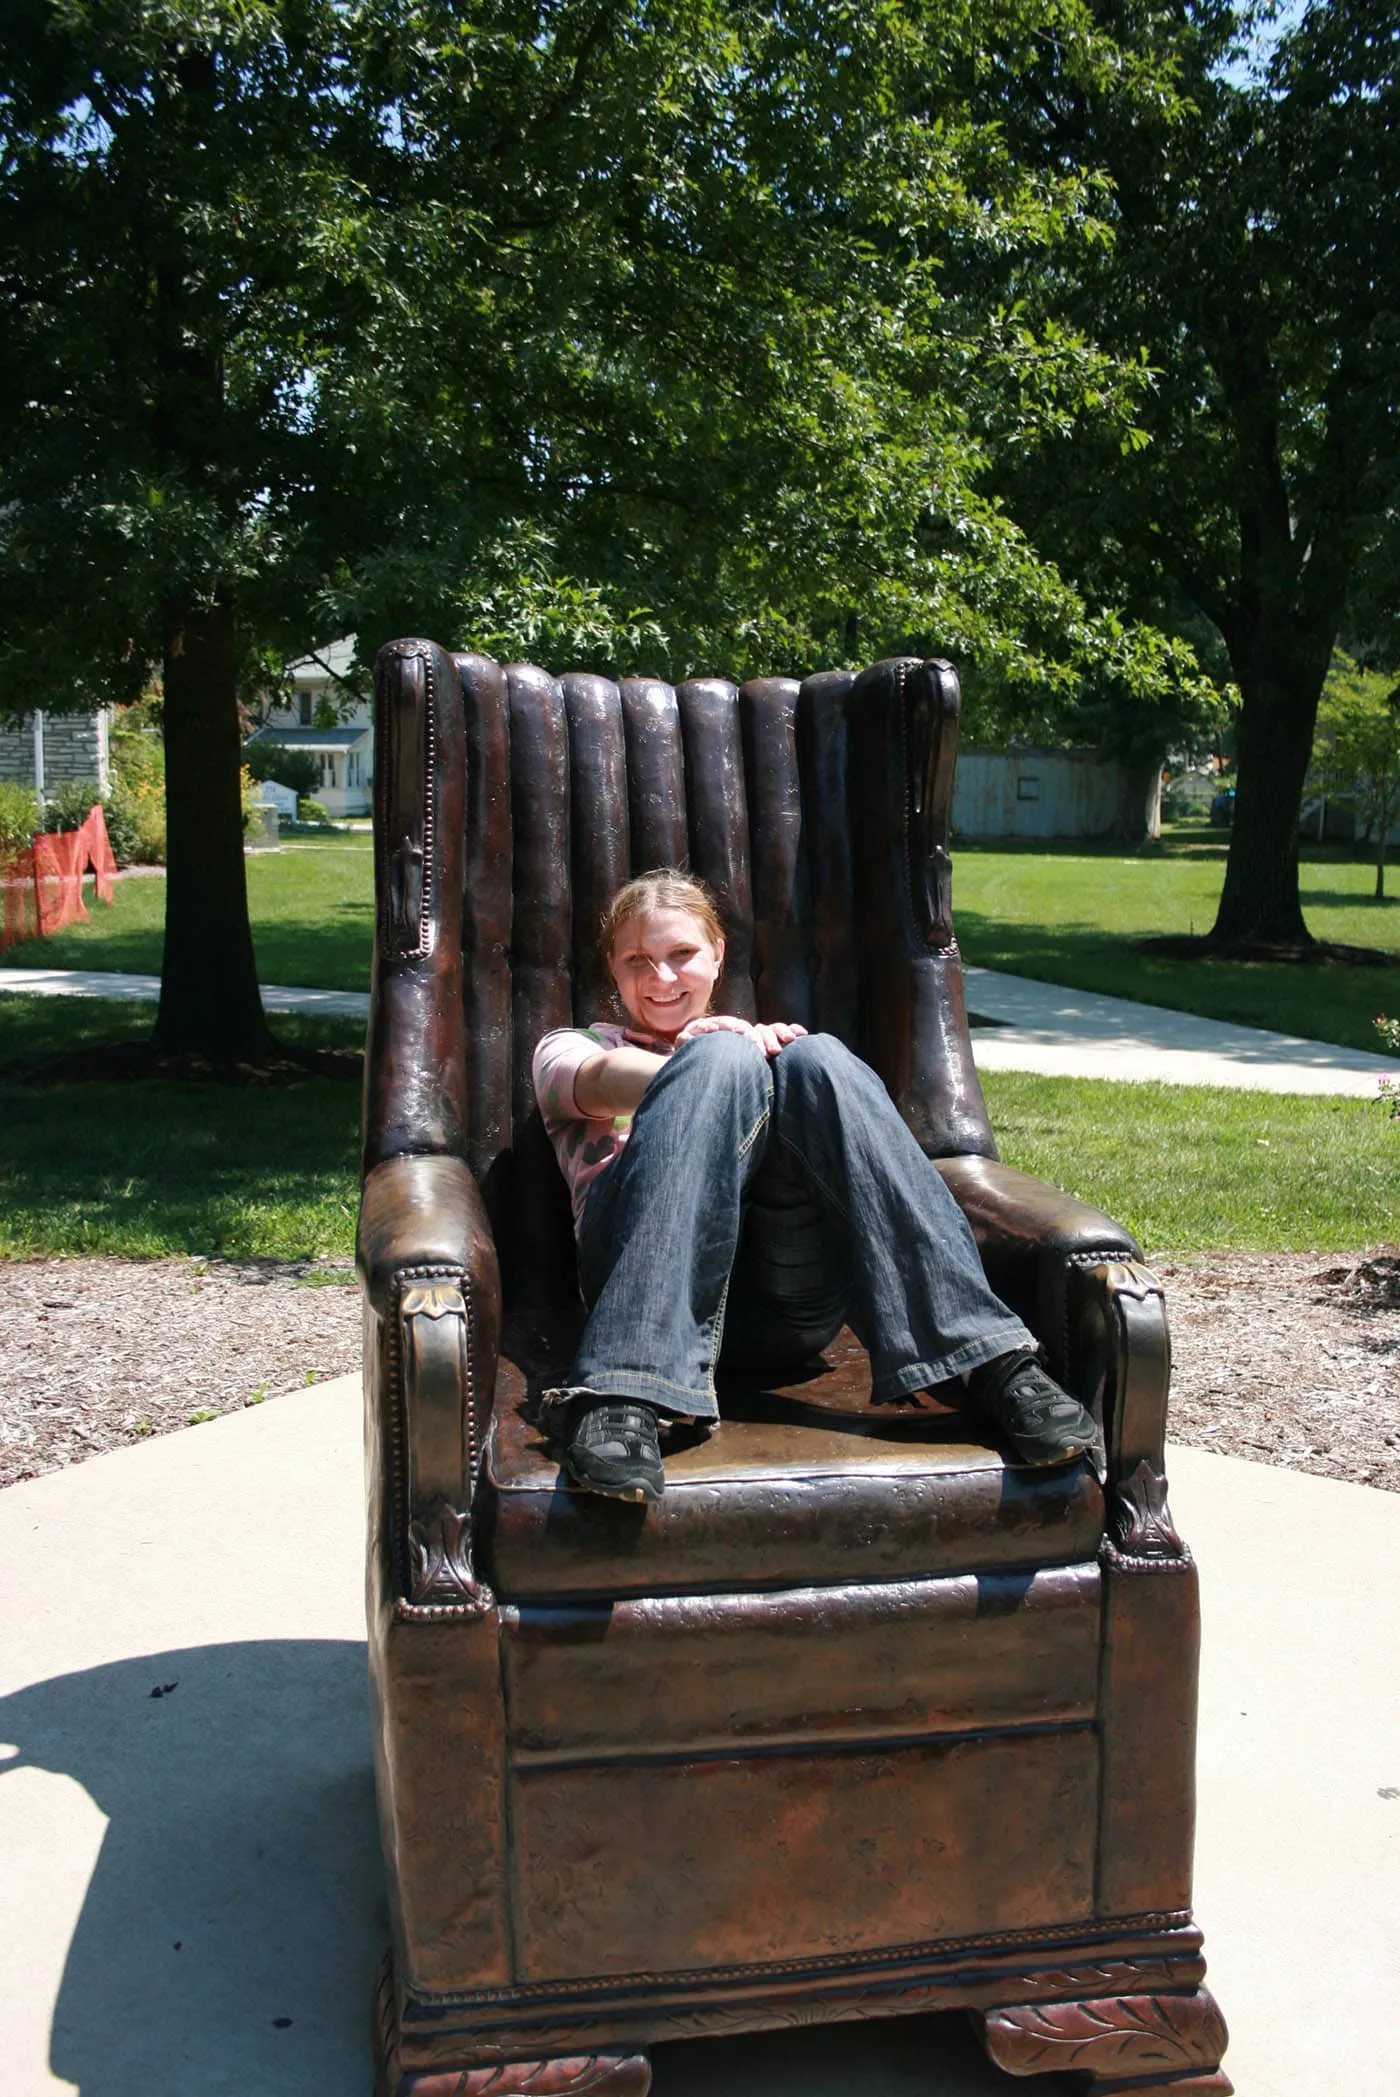 Val sits on the replica of Robert Wadlow's chair in Alton, Illinois. Robert Wadlow was the World's Tallest Man.